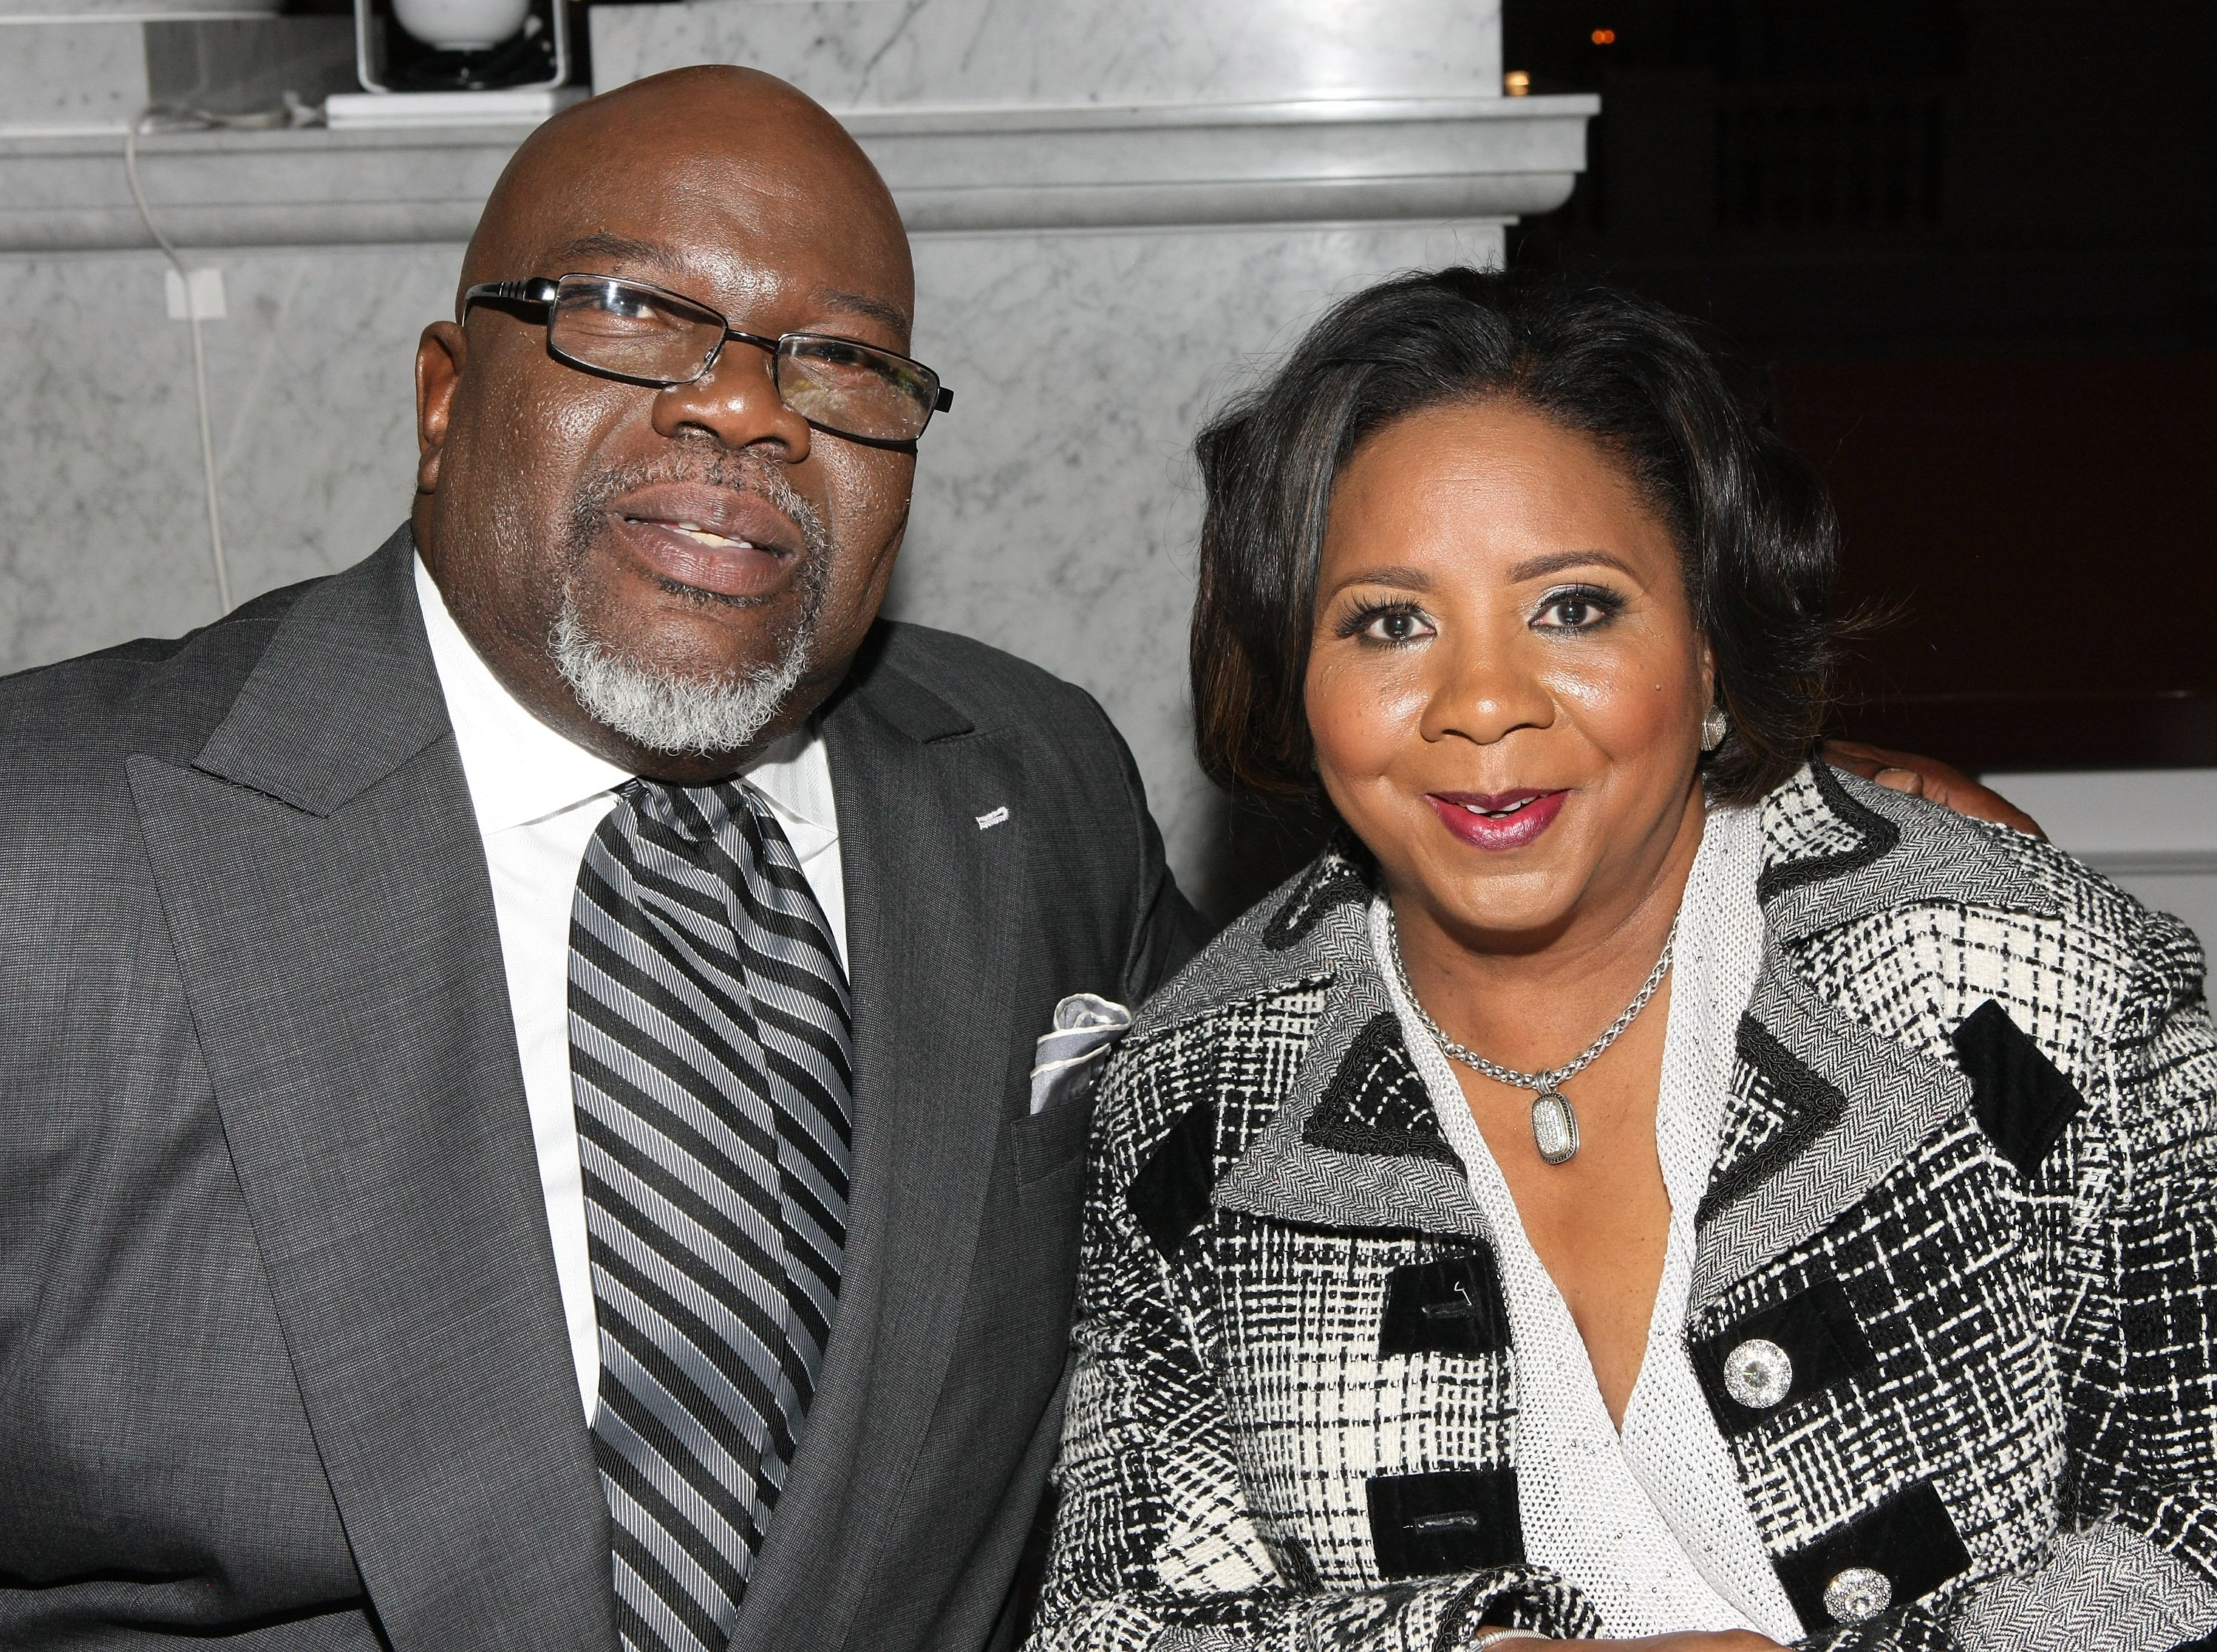 Bishop T. D. Jakes and his wife Serita Jakes at the BET Honors 2013 in Washington, DC | Source: Getty Images